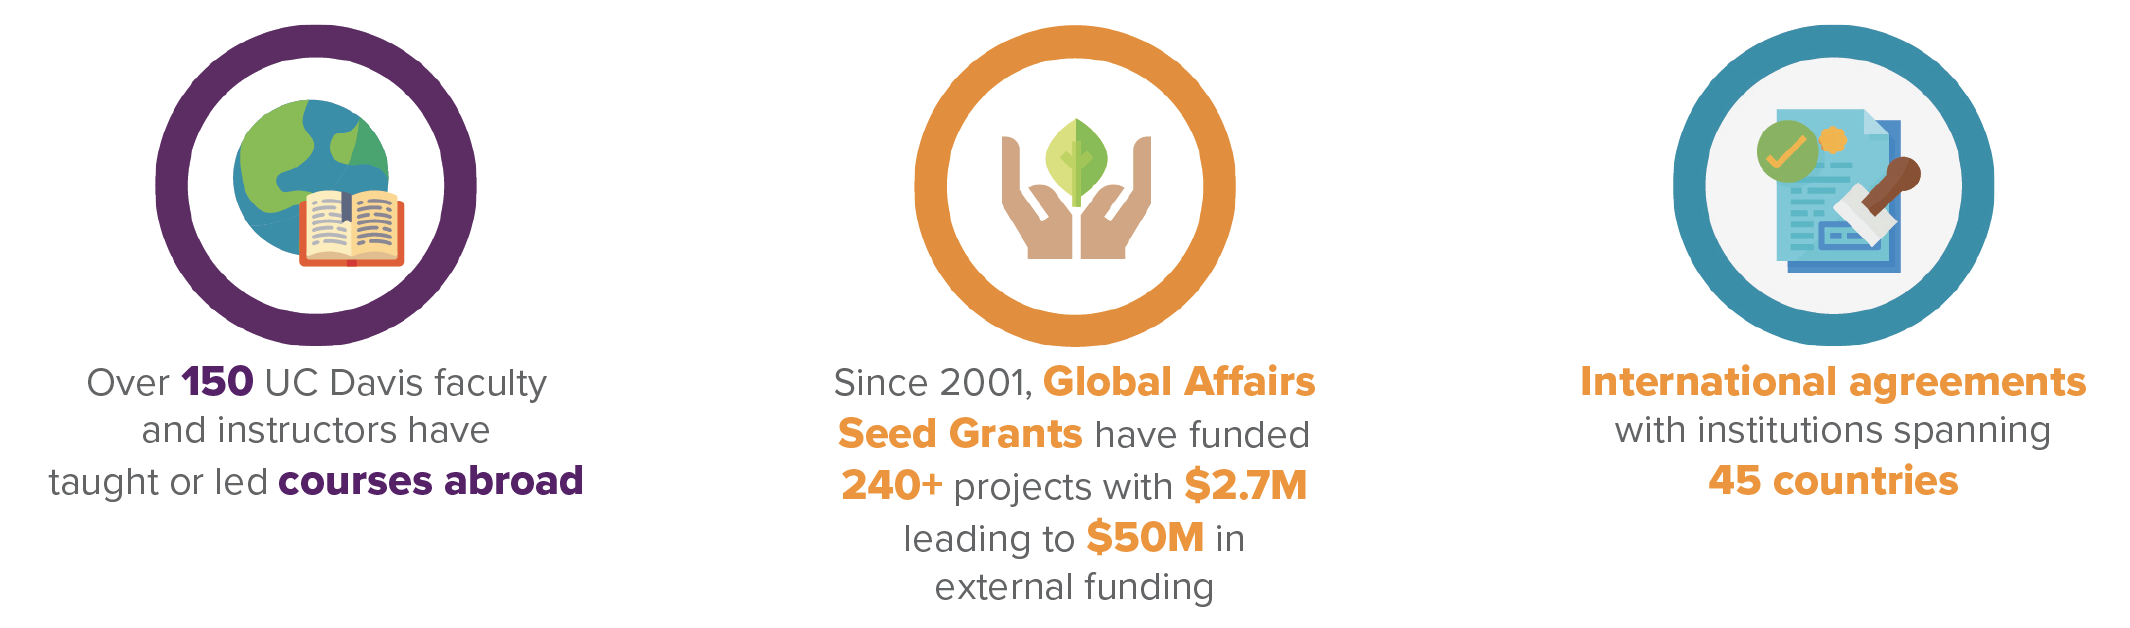 graphic: more than 150 faculty have taught education abroad courses, more than 220 seed grant projects have led to more than $40 million in external funding, agreements of cooperation with institutions spanning 45 countries 